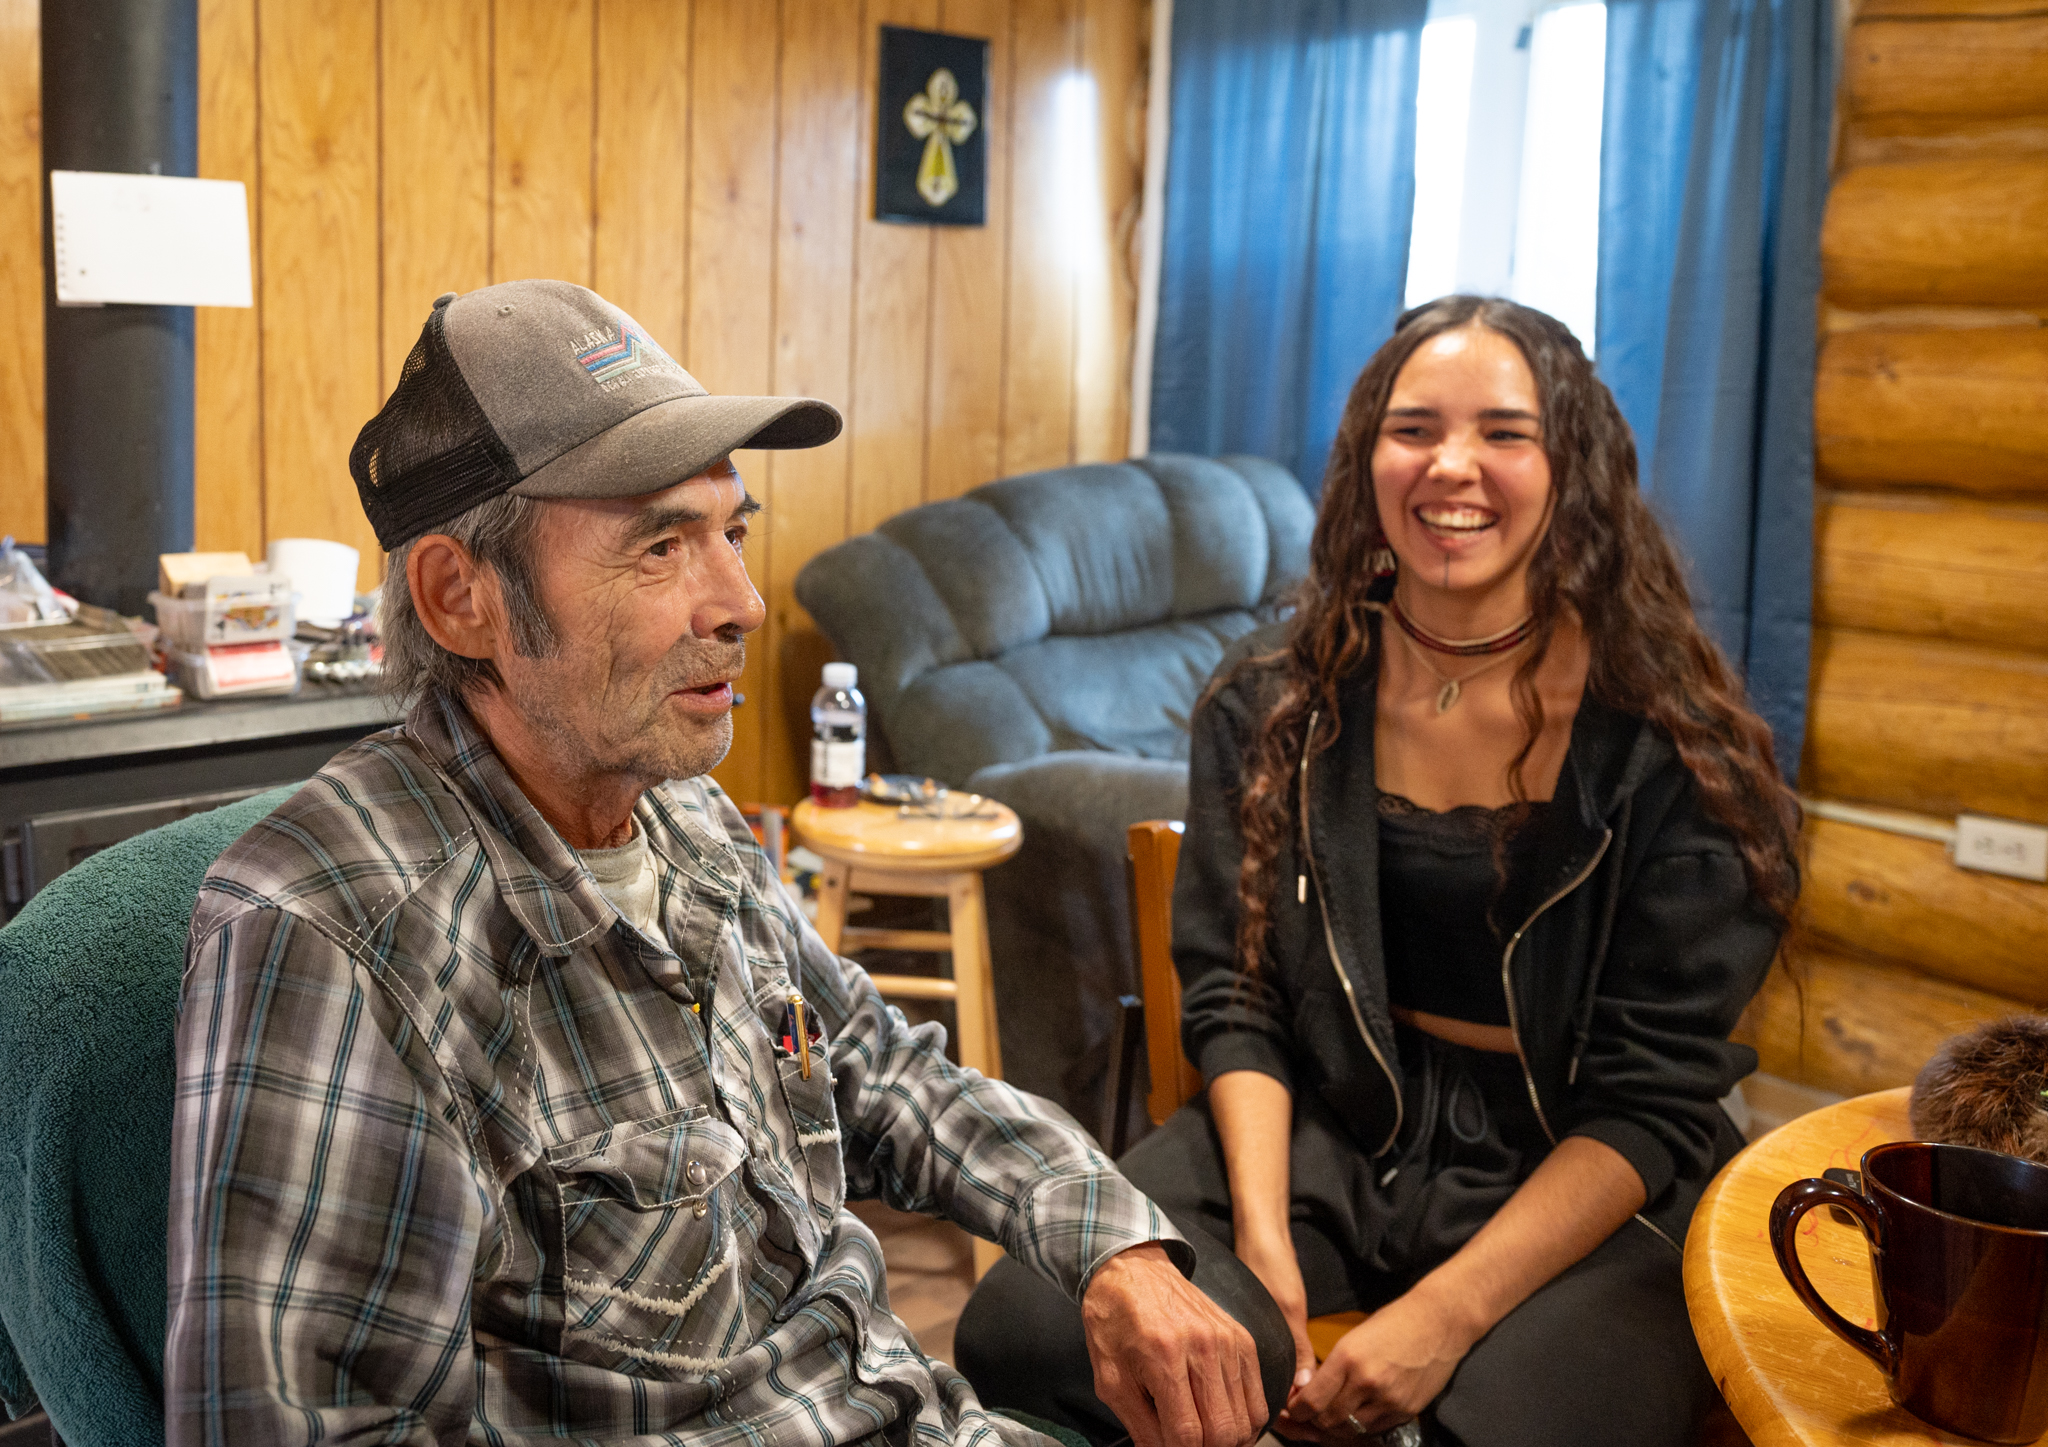 A man and woman share stories by a wood stove.